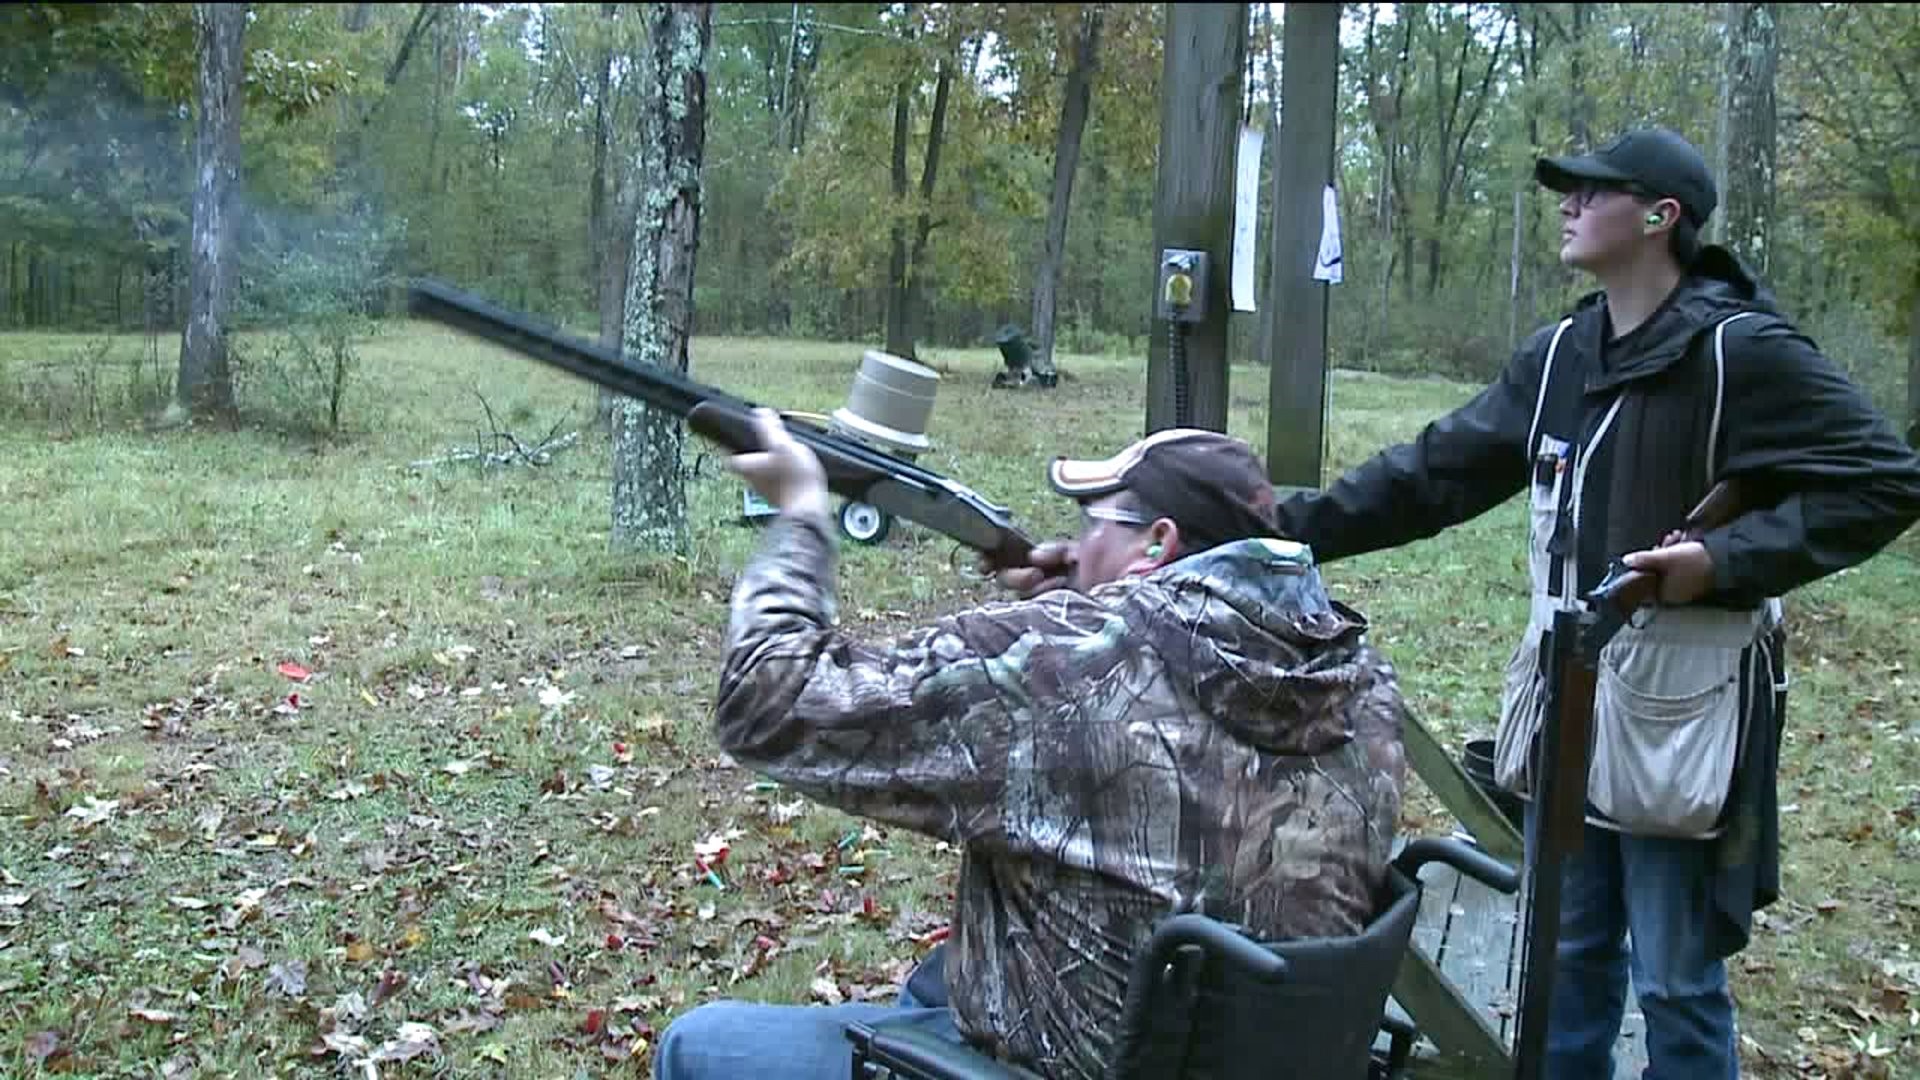 Clay Shoot Benefits People with Disabilities